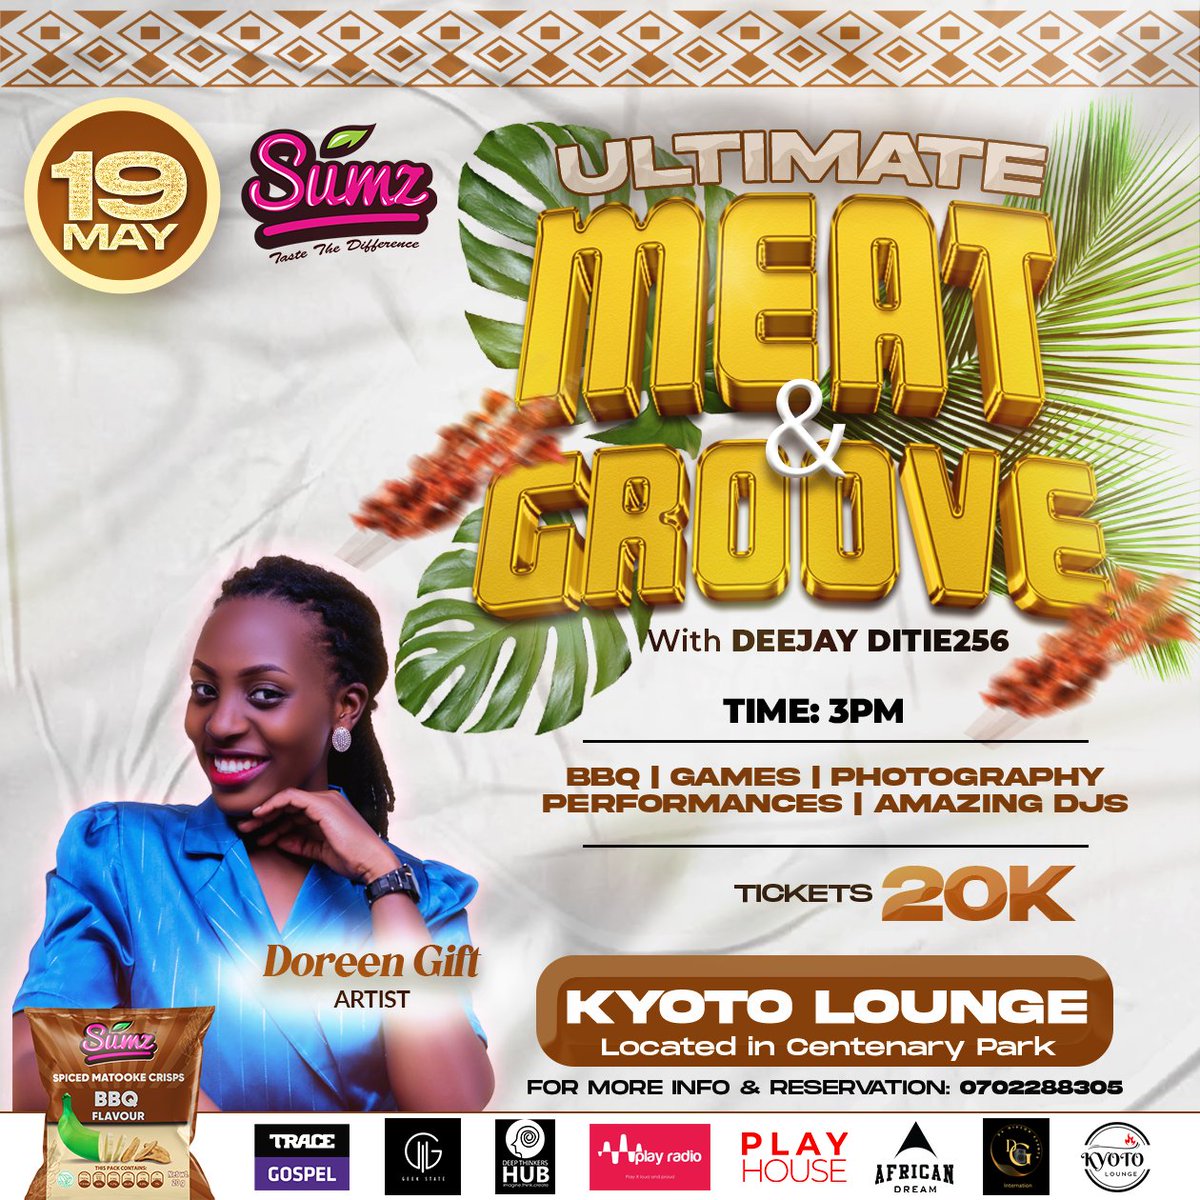 Doreen Gift will be live at Kyoto Lounge for @MeatAndGroove!🥳 We know the sound of revival will be felt throughout the place come 19th May, don't miss out! . Tickets are available on ticketyo.com/ultimate-meat-… at 20K 🎫 And On @mtnmomoug Dial *165*3# Code 051058 #MeatAndGroove